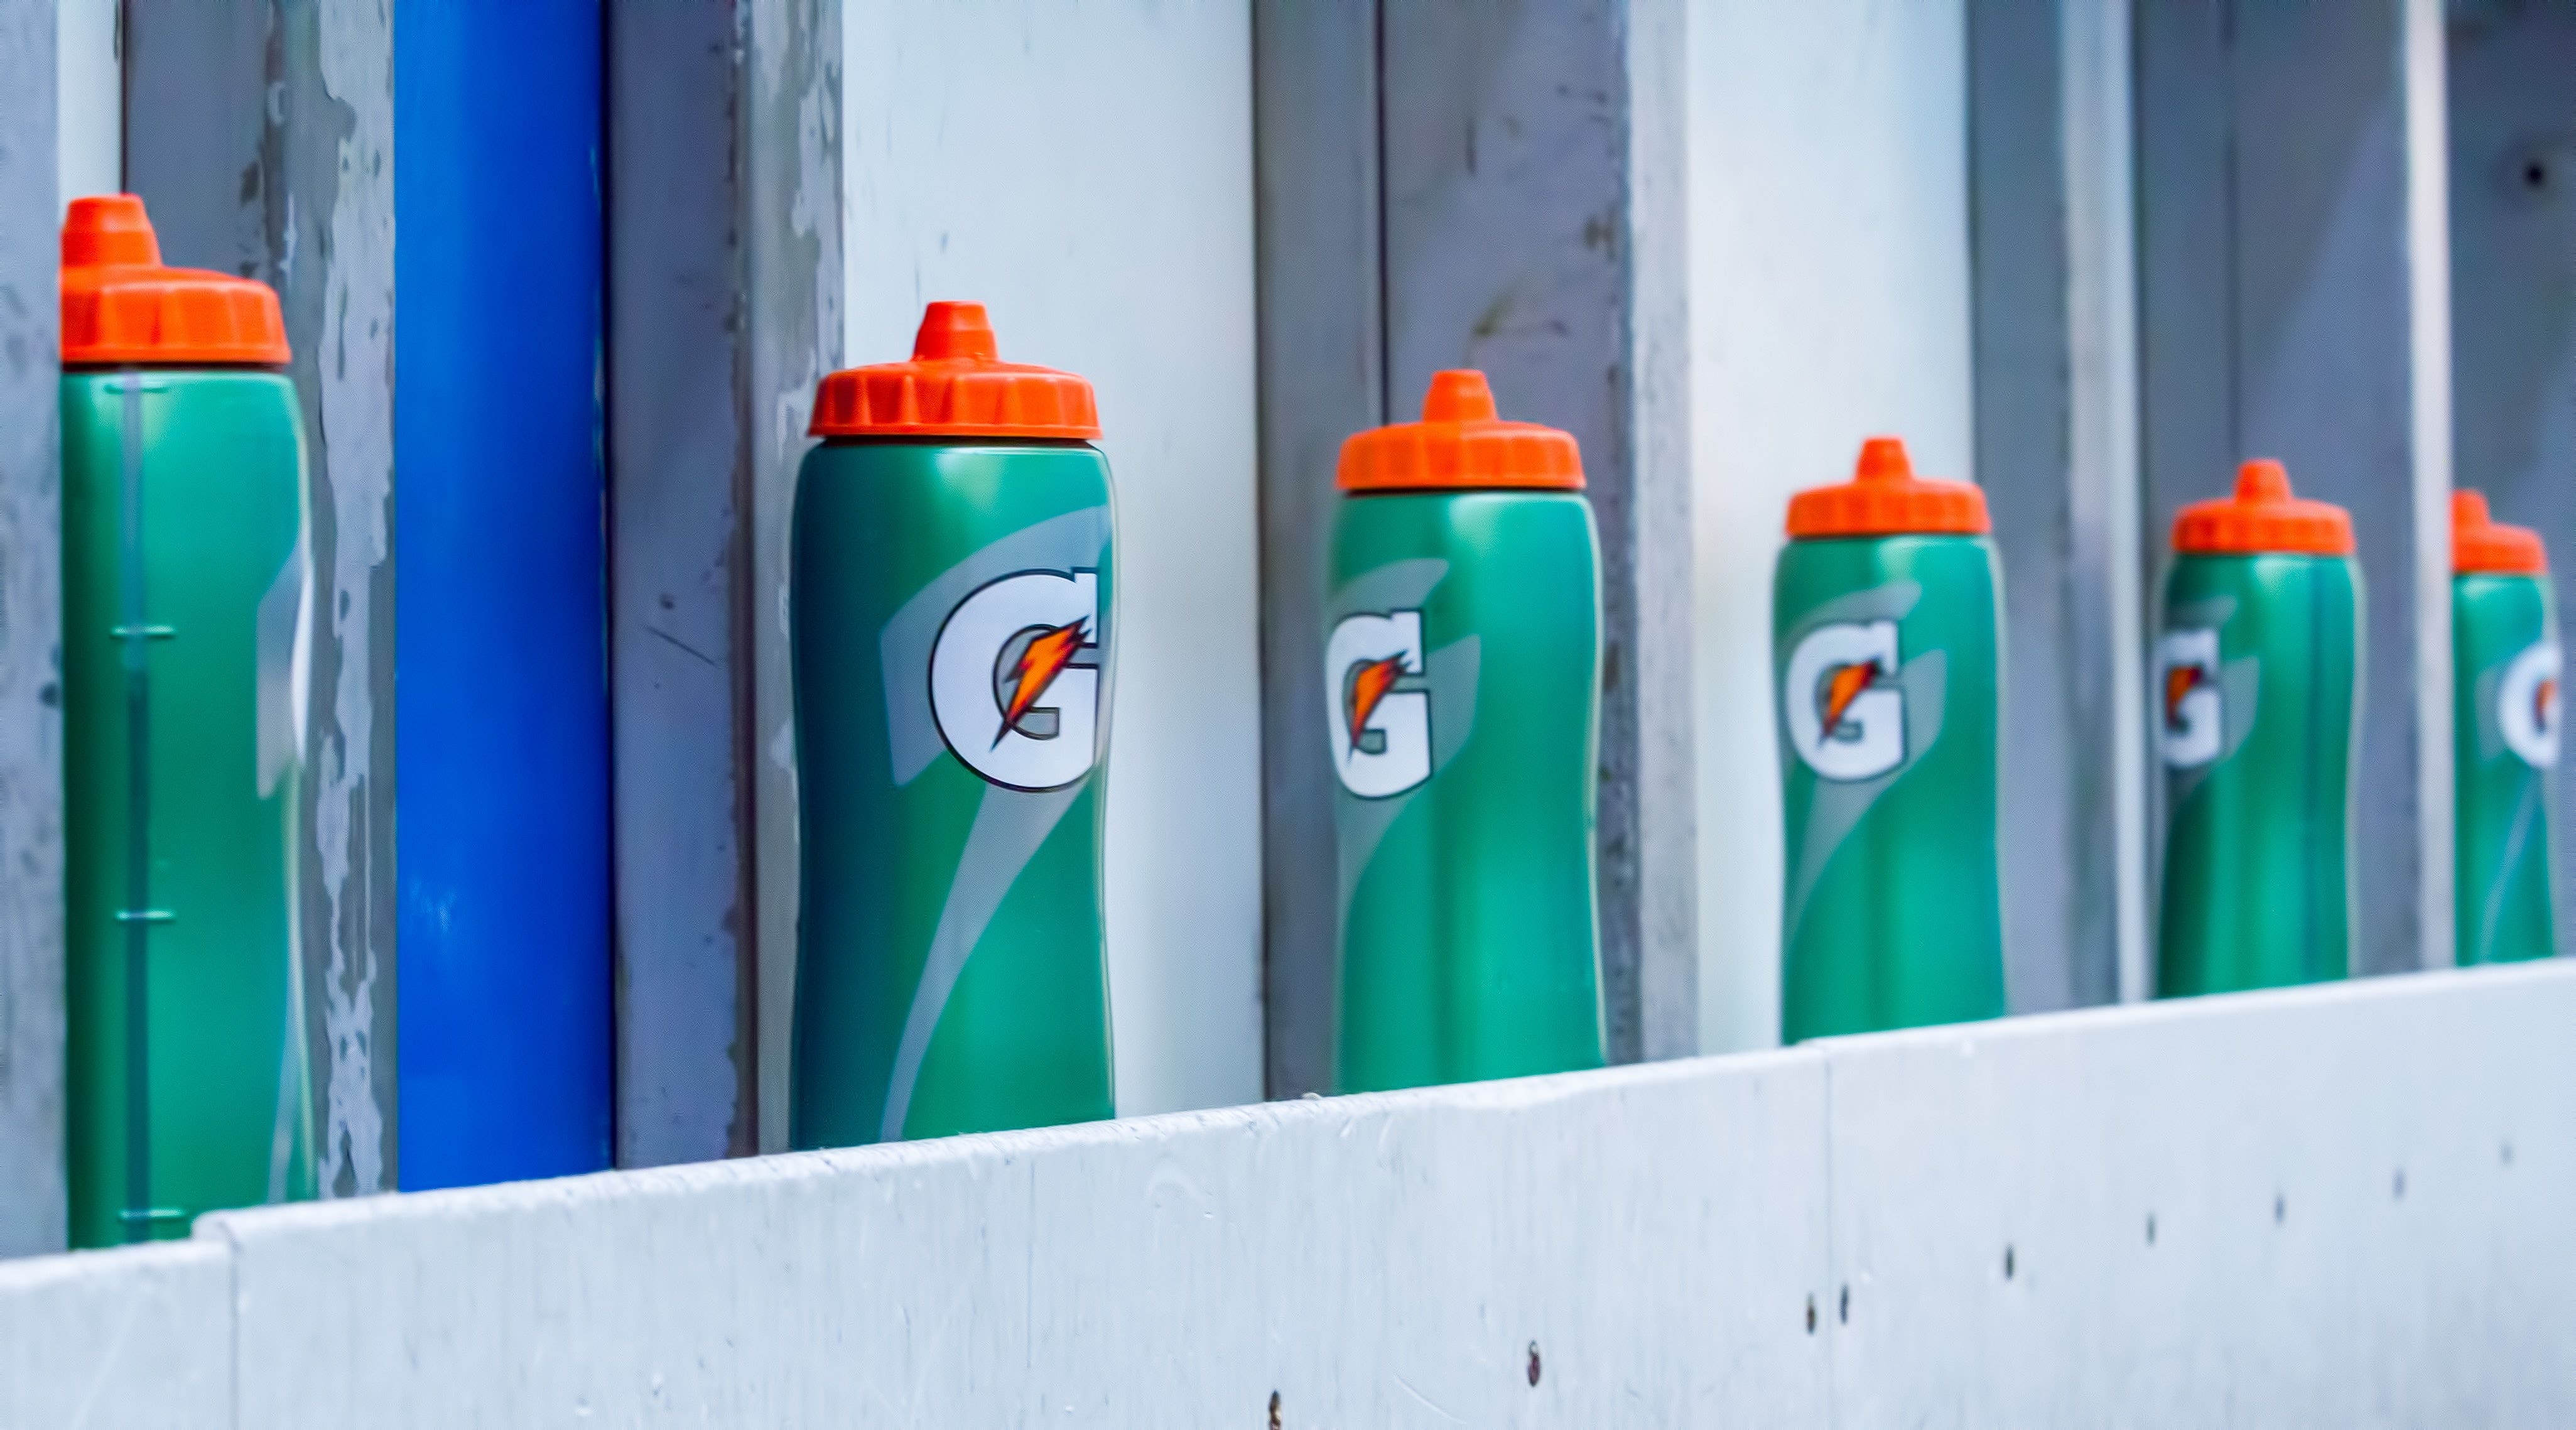 If You Invested $1,000 In Pepsi When It Bought Gatorade, Here's How Much You'd Have Now